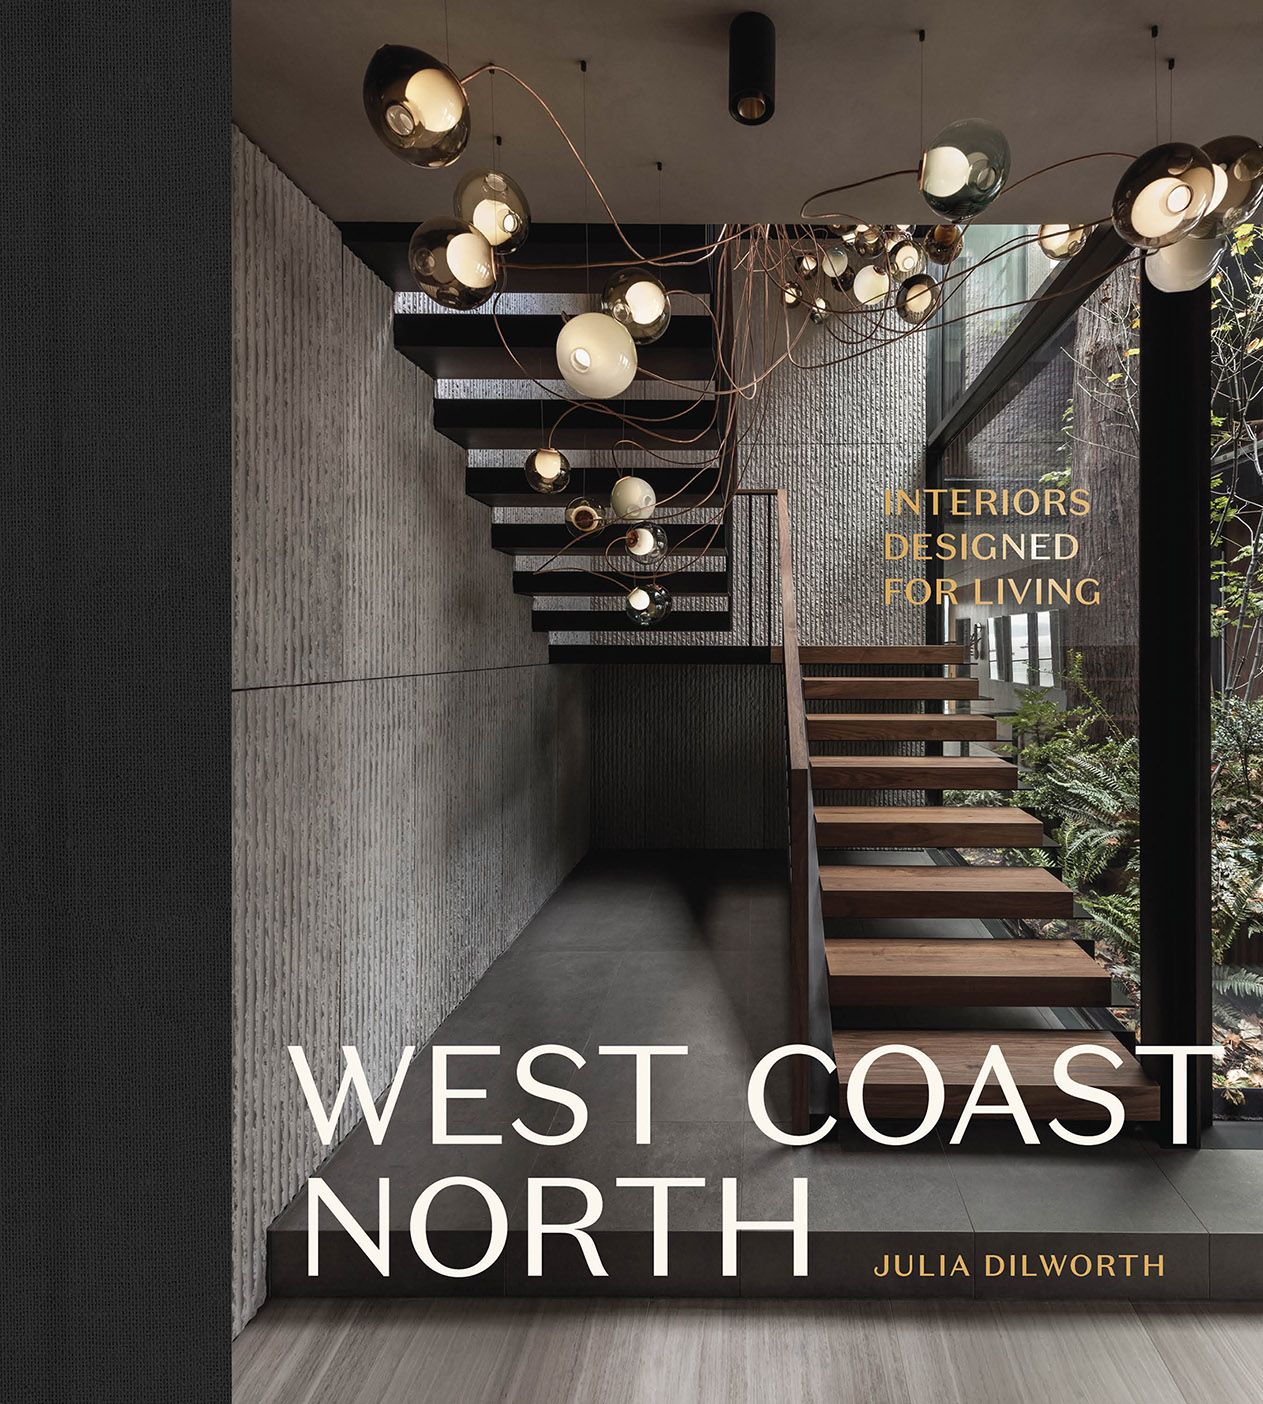 West Coast North is a guide to today’s exciting B.C. designers. But it’s also a source of inspiration. Written by Julia Dilworth.